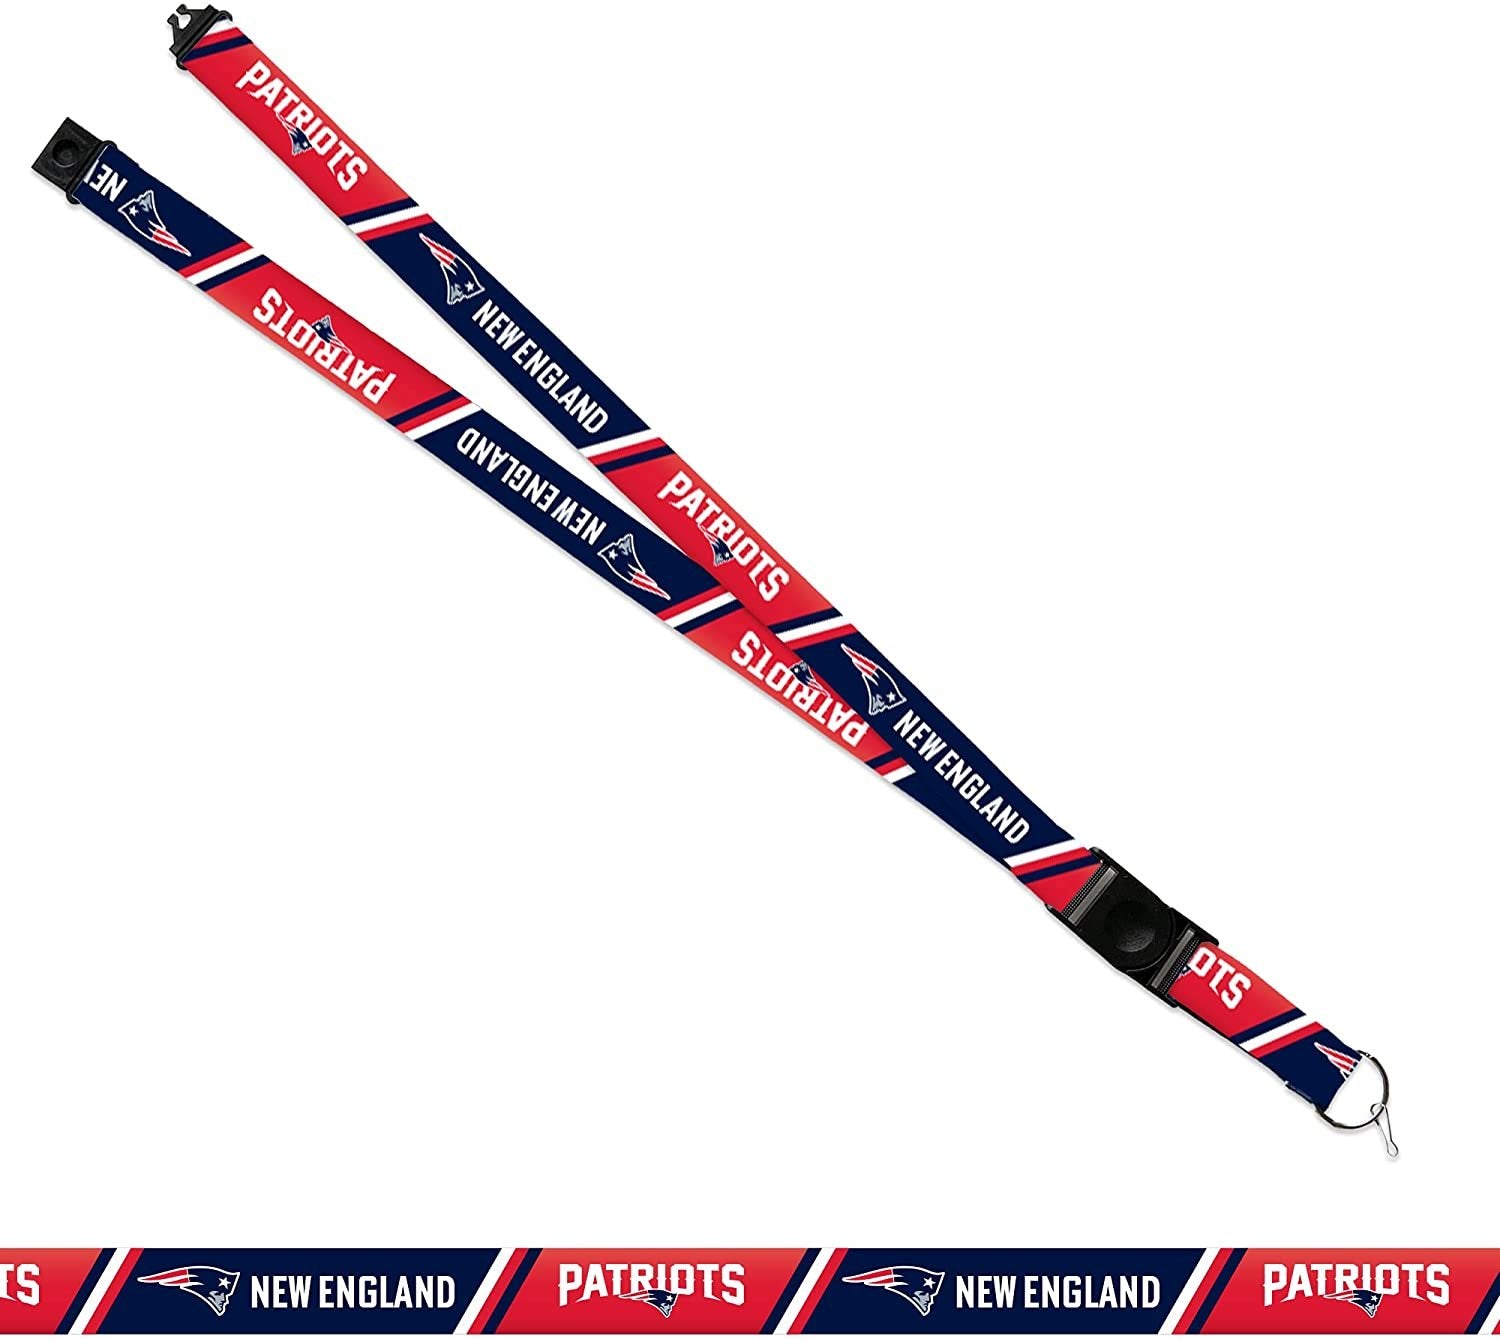 New England Patriots Lanyard Keychain Double Sided Breakaway Safety Design Adult 18 Inch